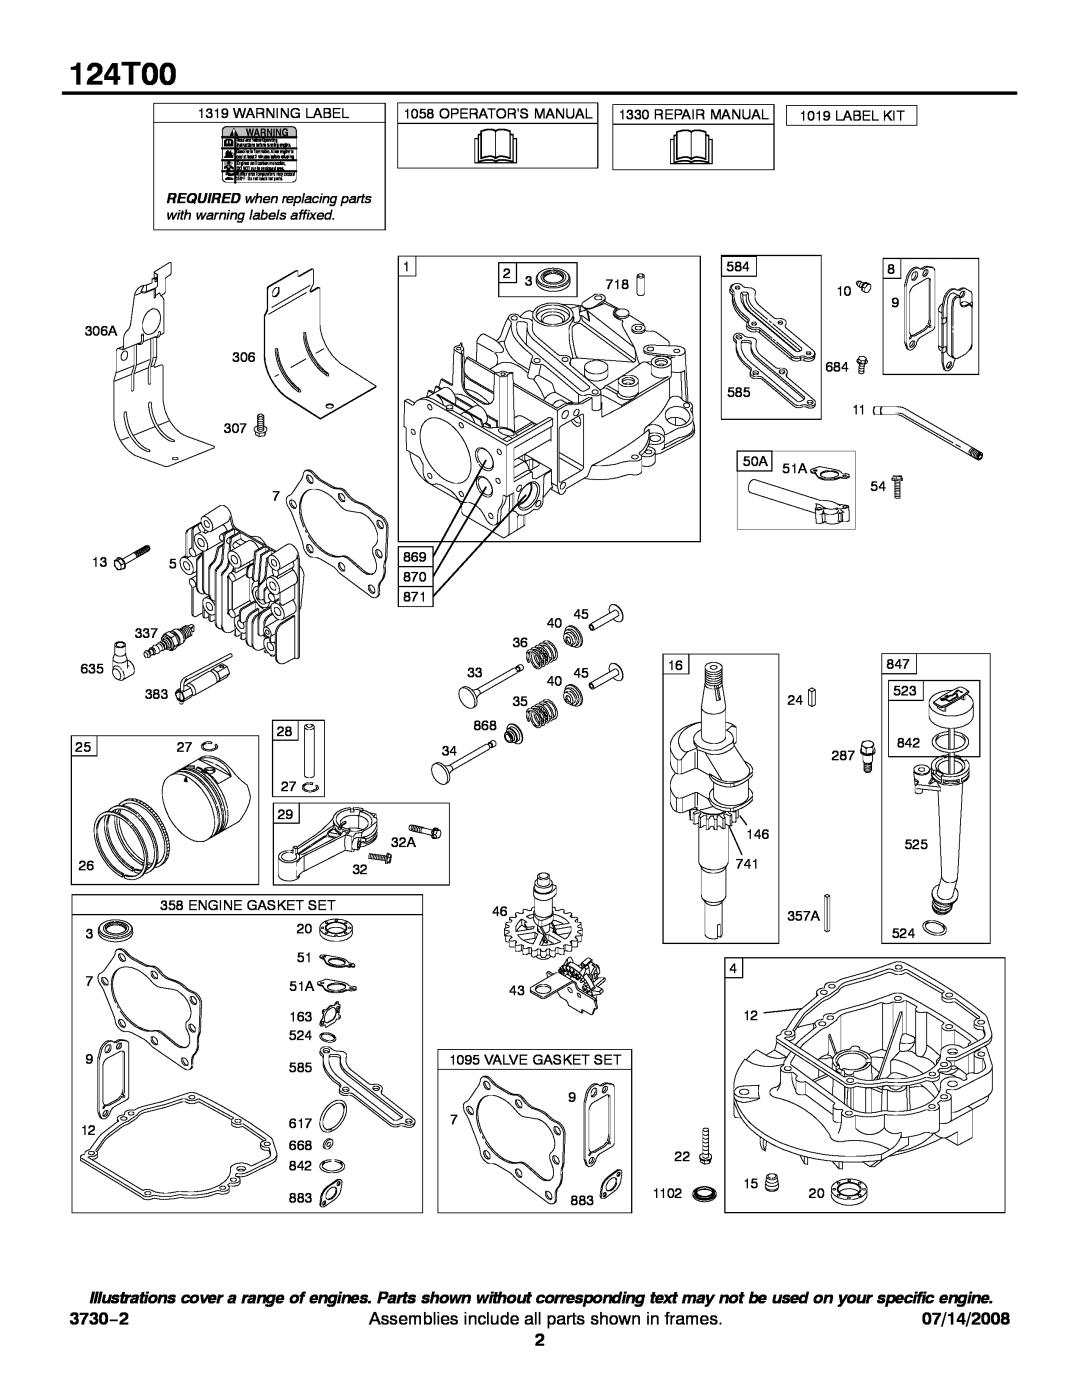 Snapper 124T00 service manual 3730−2, Assemblies include all parts shown in frames, 07/14/2008 